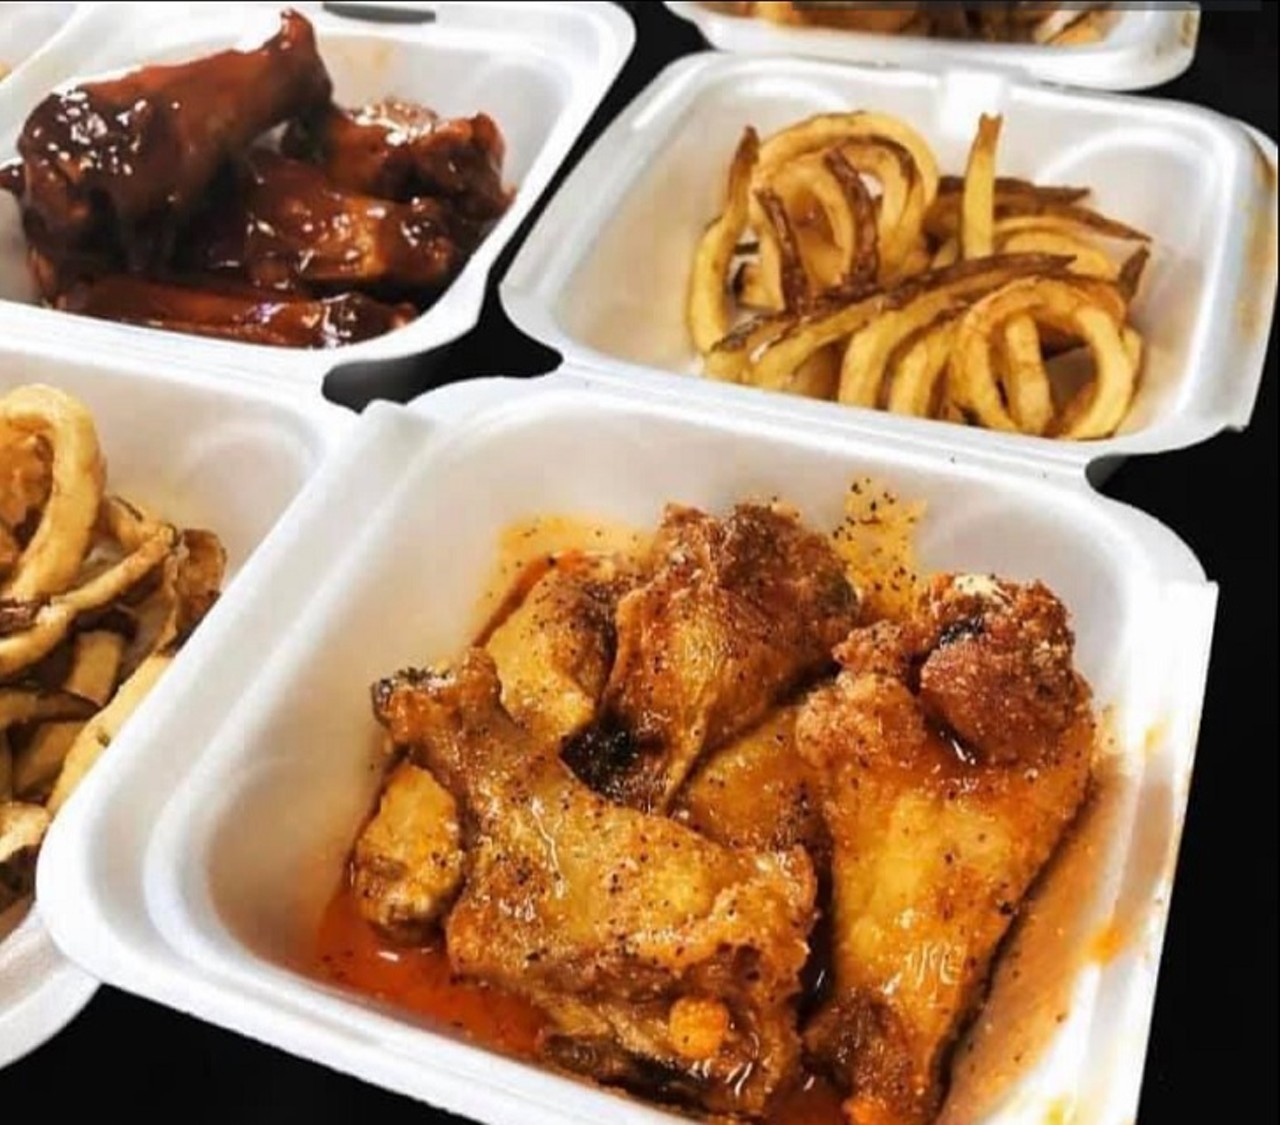 Wingz Wingzz Wingzzz 
452 N Park Ave, Apopka, 407-464-3779
As the name shows, here there be Wingz! This Apopka restaurant offers great wings, at great prices.
Photo via Wingz Wingzz Wingzzz on Facebook